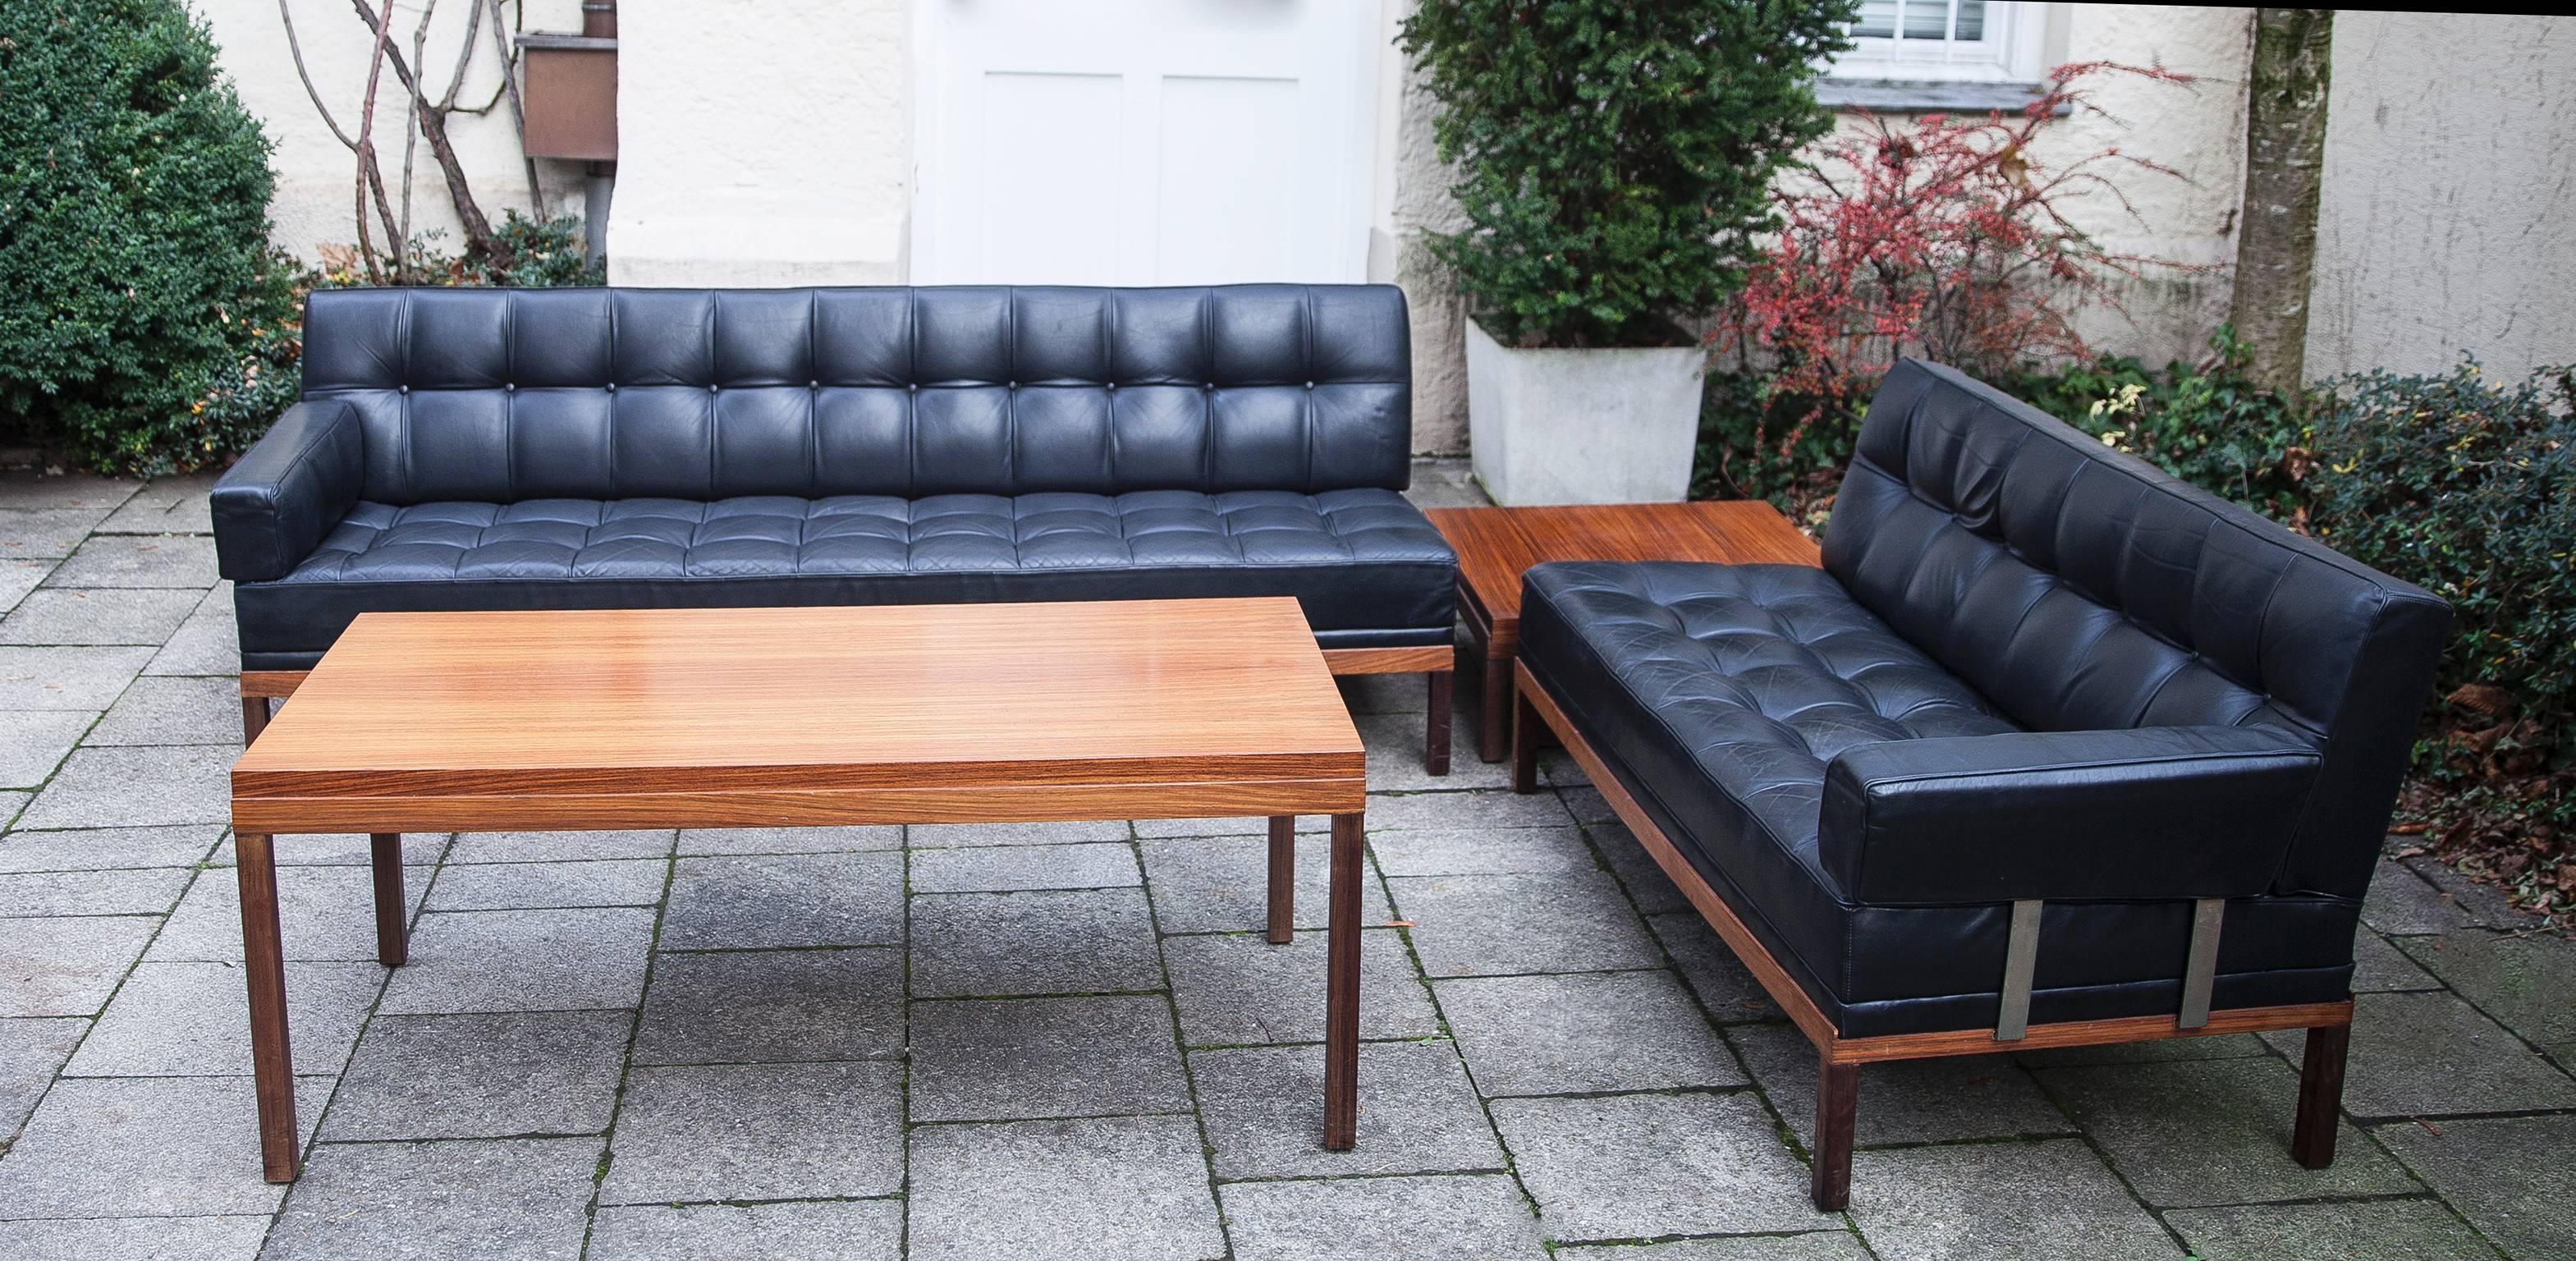 Ultra rare sofa living room set from by Johannes Spalt 1961 and made by Wittmann, Austria. The set includes a three-seat sofa which changing in a daybed, a two-seat sofa, two removable arm rests, a teak coffee table and a teak end